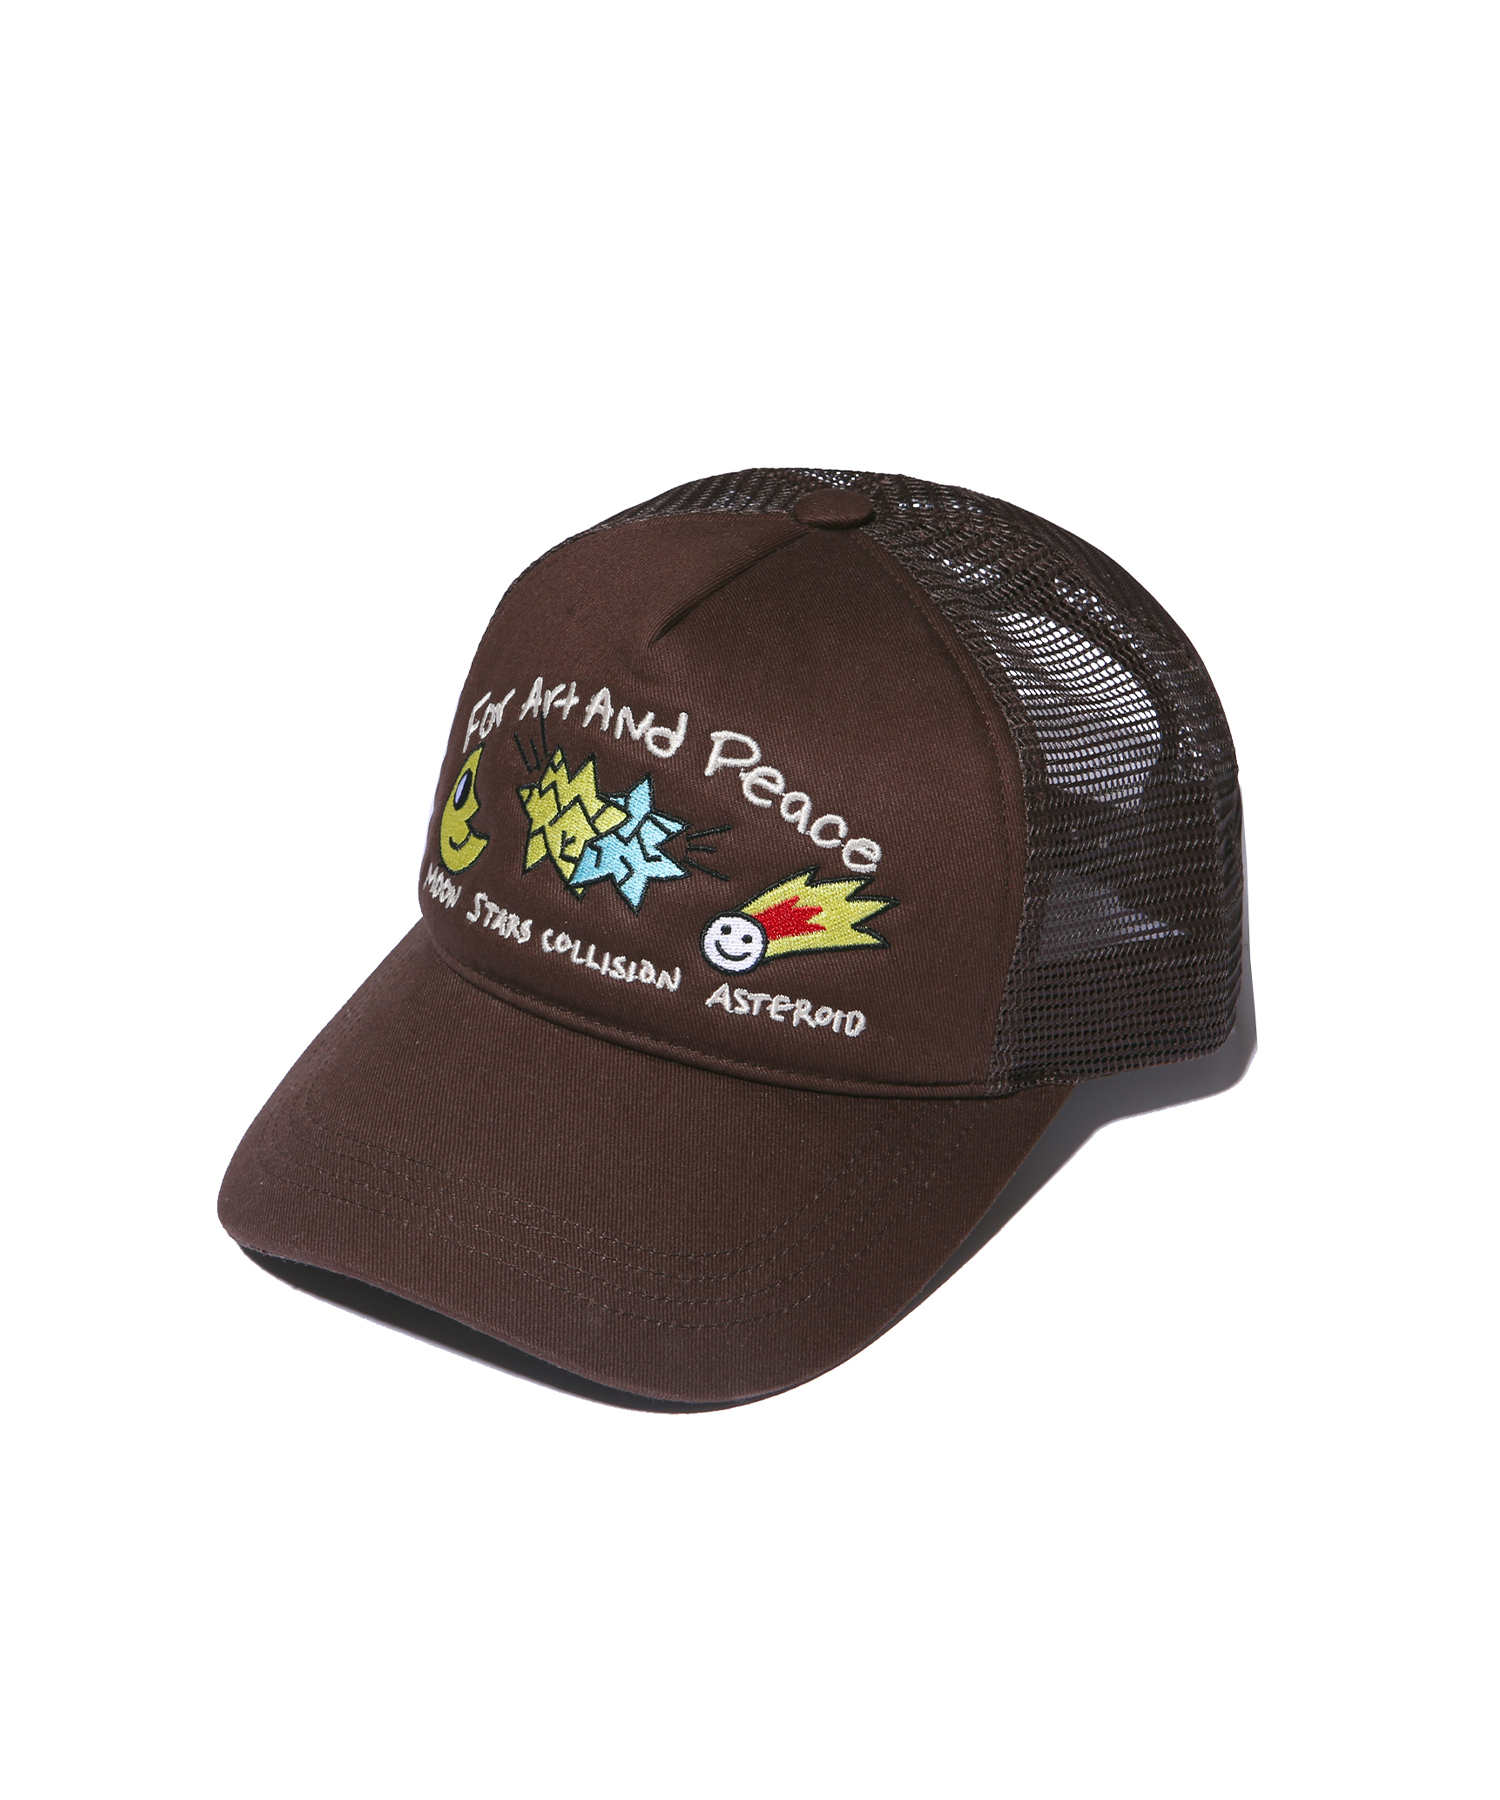 FOR ART AND PEACE MASH CAP BROWN